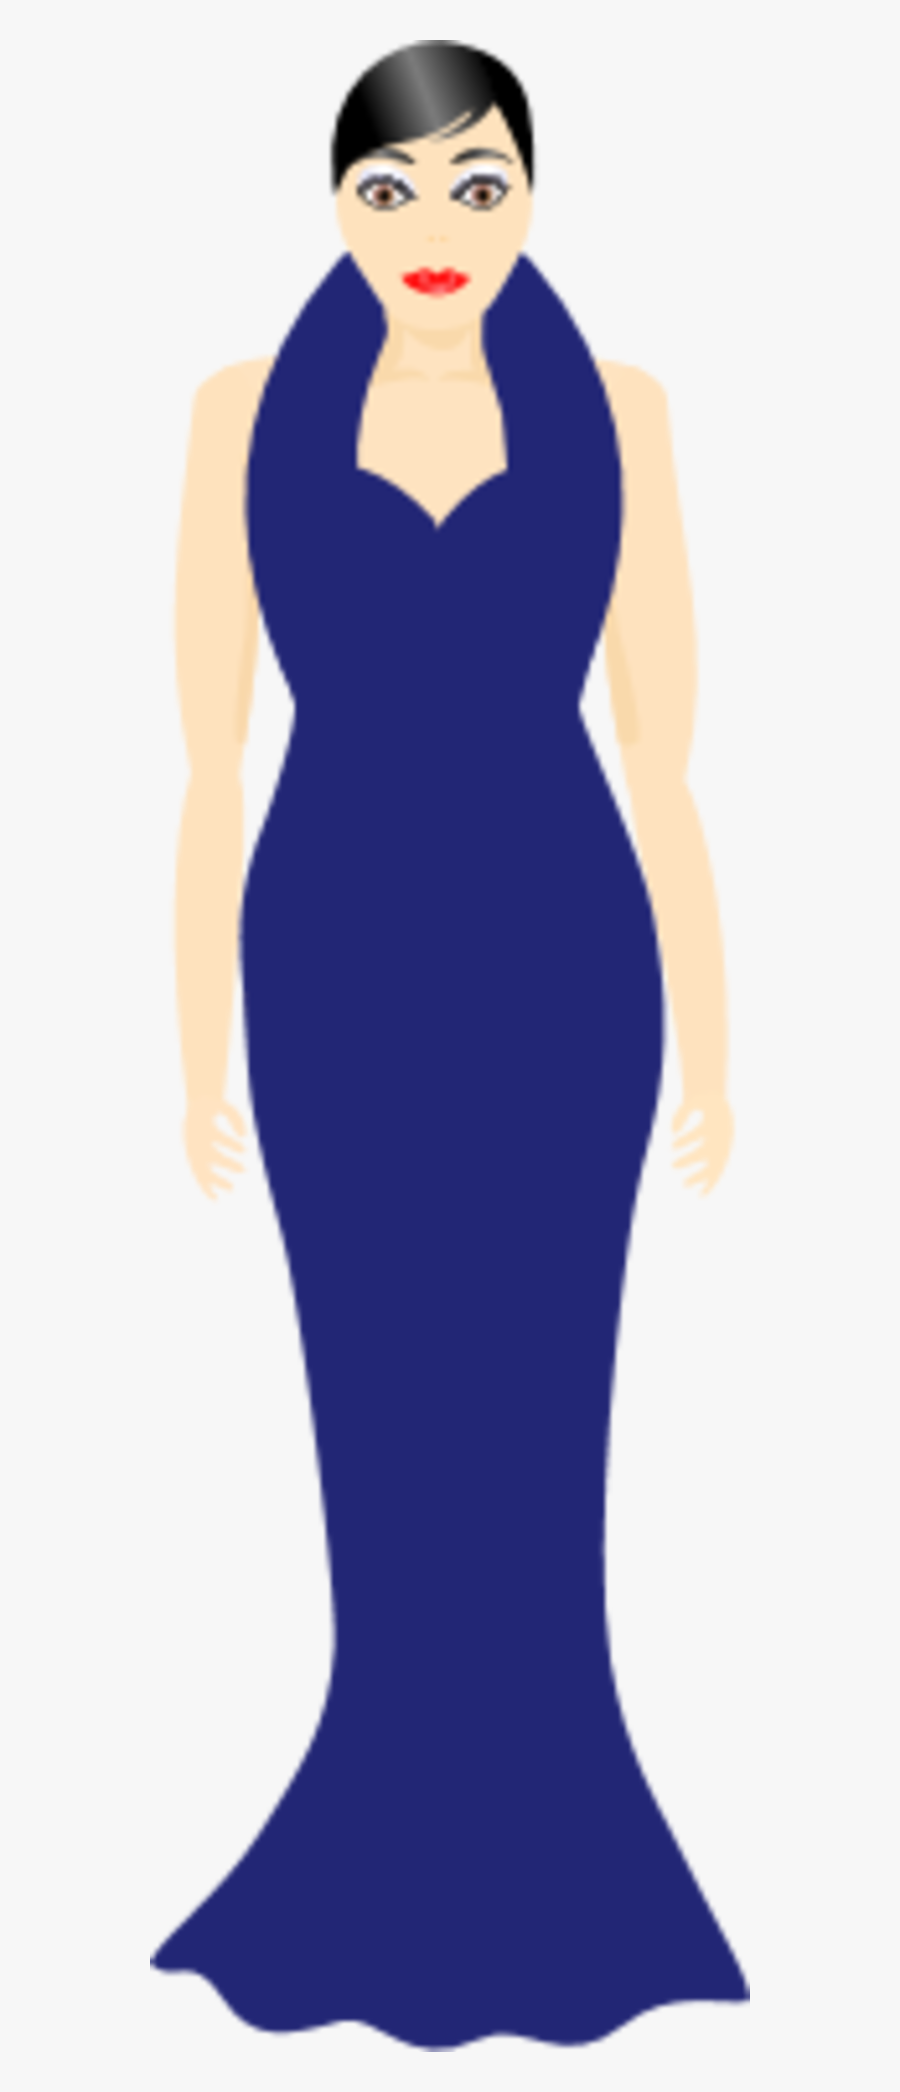 Clipart Woman Dressing - Girl Wearing Gown Clipart Png, Transparent Clipart